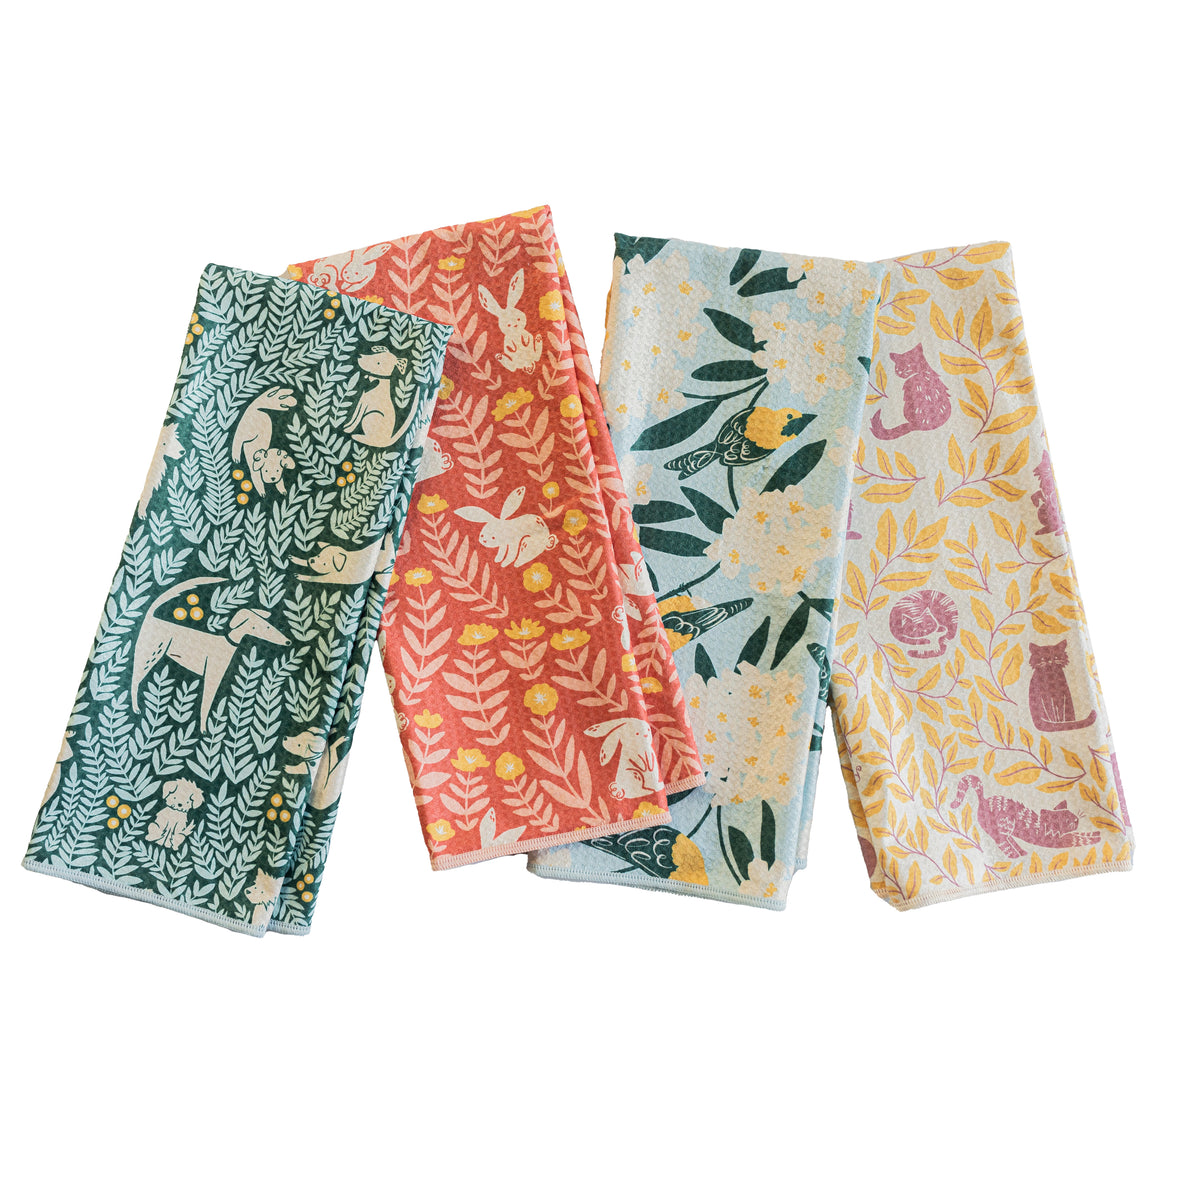 Assorted Anywhere Towel Reversible - Nuthatch Little Friends Kitchen Towels Once Again Home Co.   